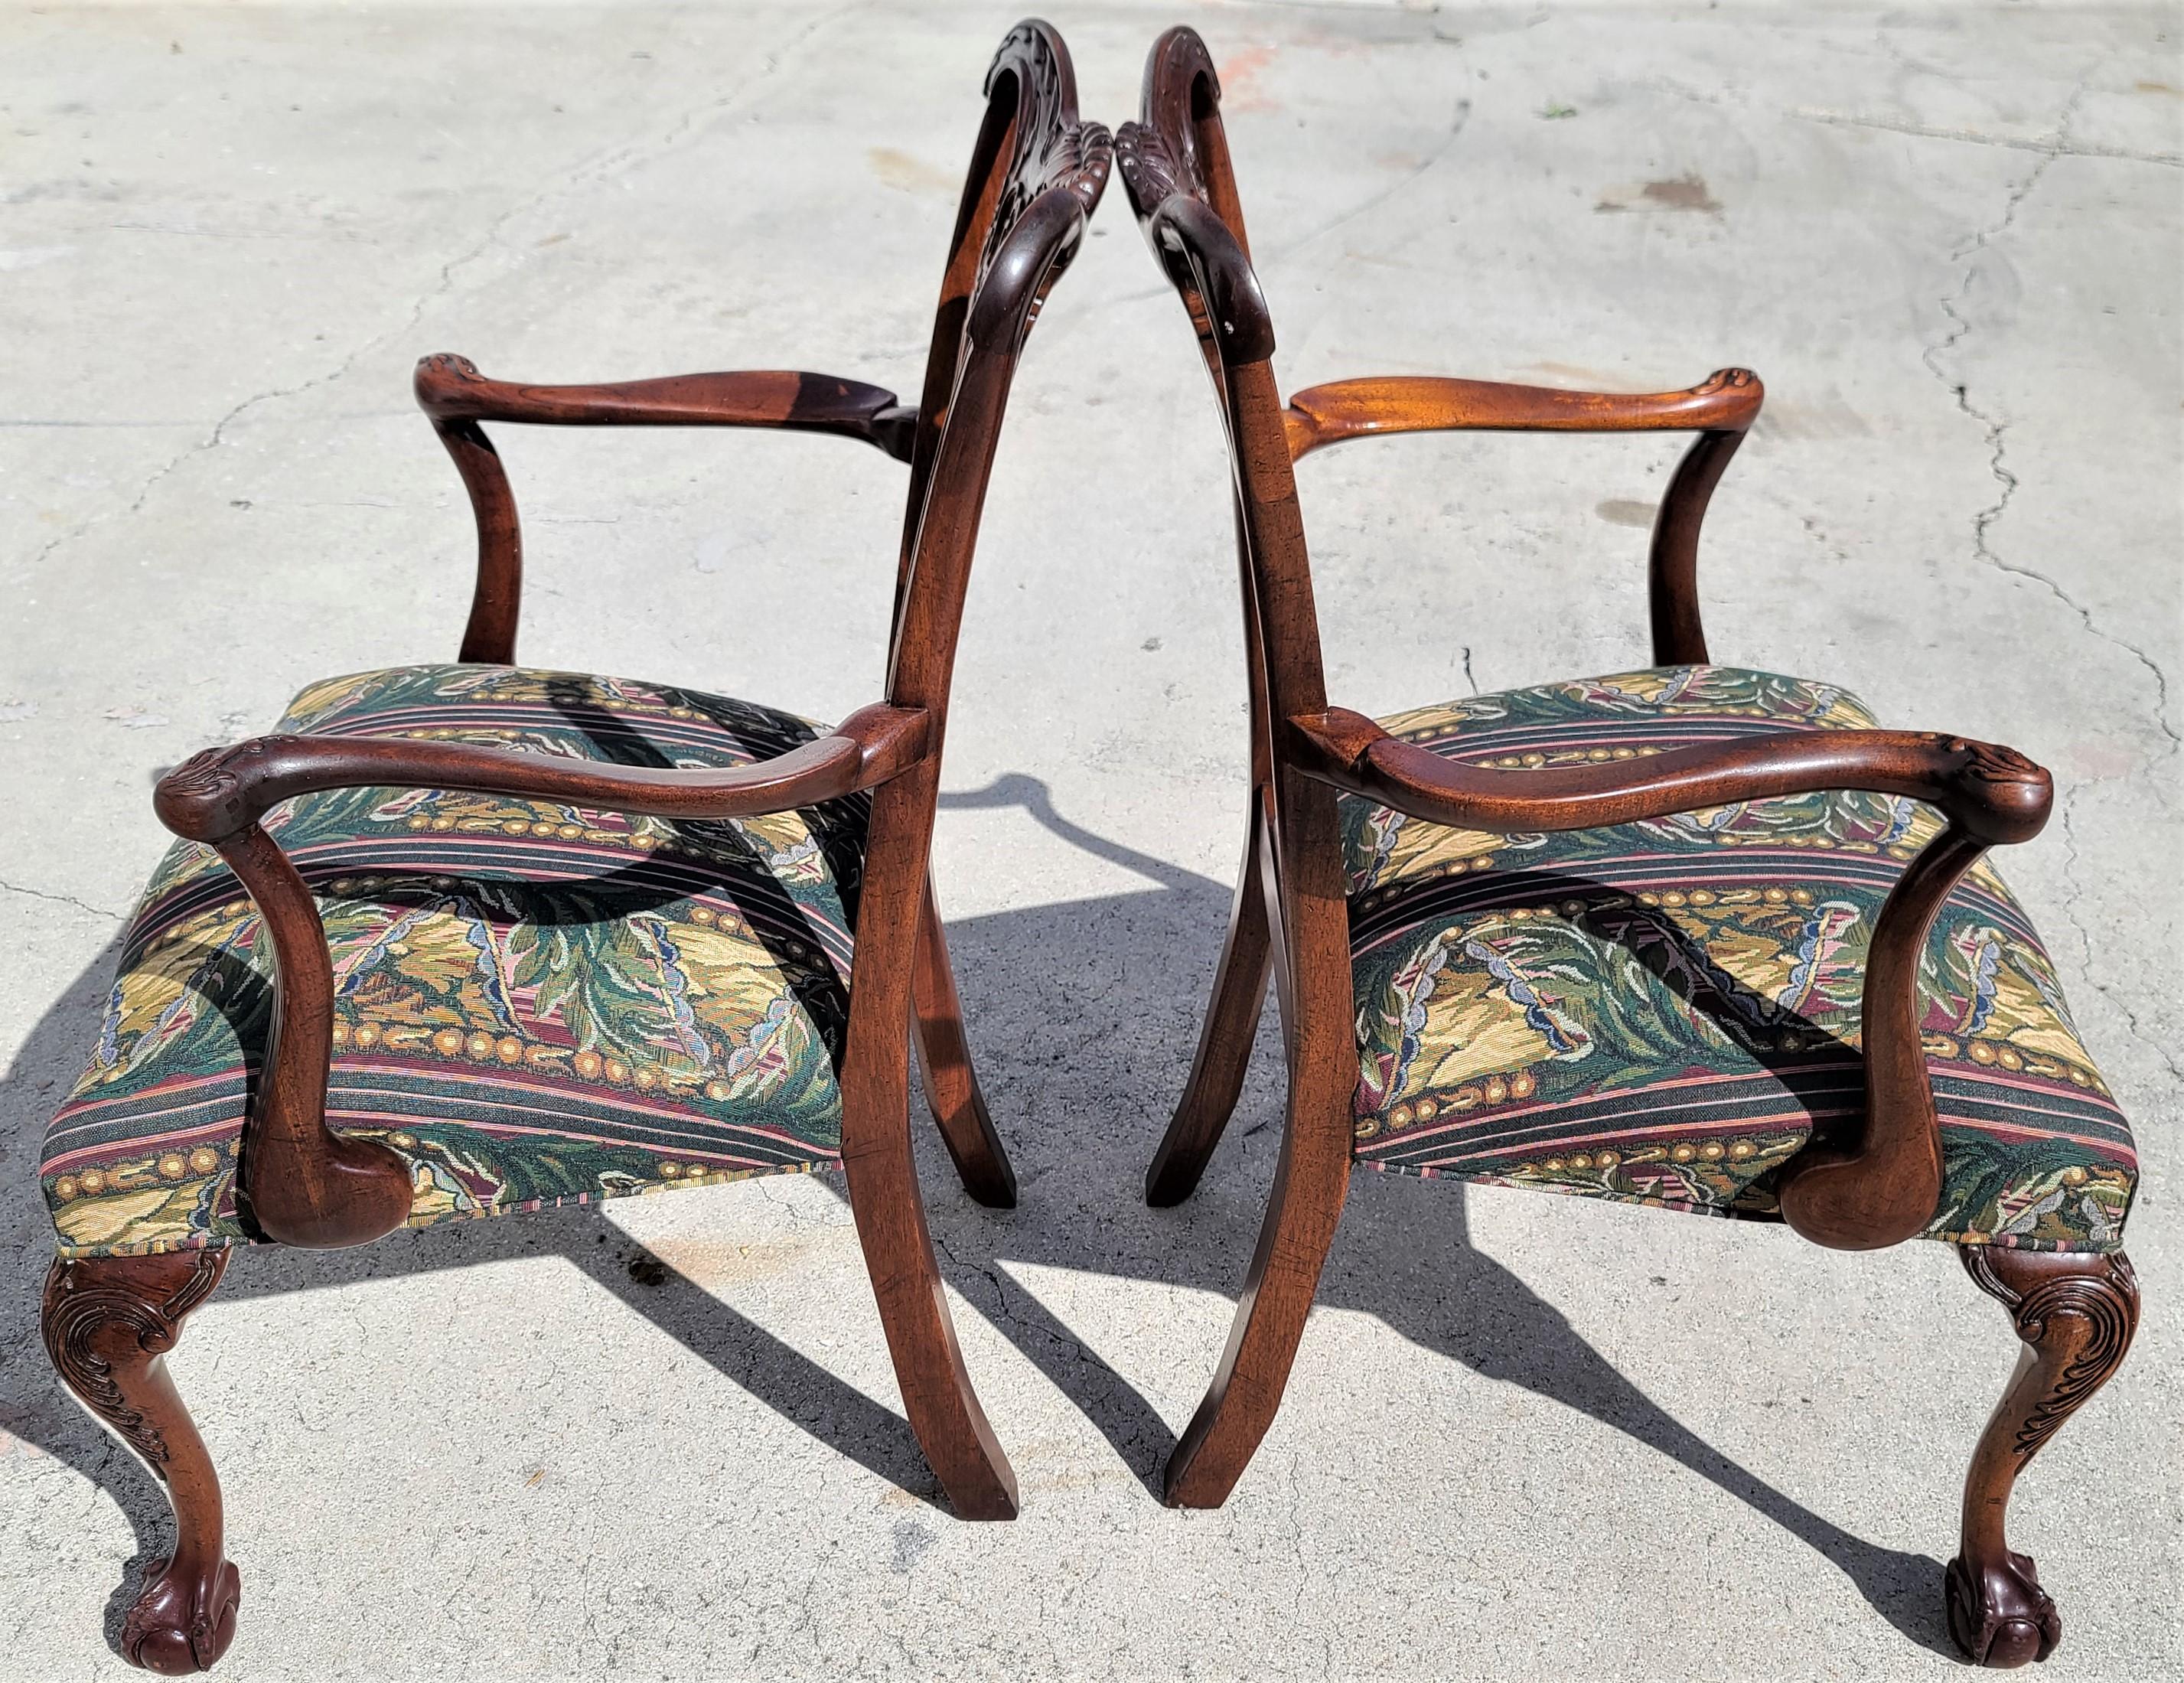 Offering one of our recent Palm Beach Estate Fine furniture acquisitions of a
Pair of antique c 1900 Edwardian Chippendale mahogany ball & claw armchairs

Approximate measurements in inches
37.5